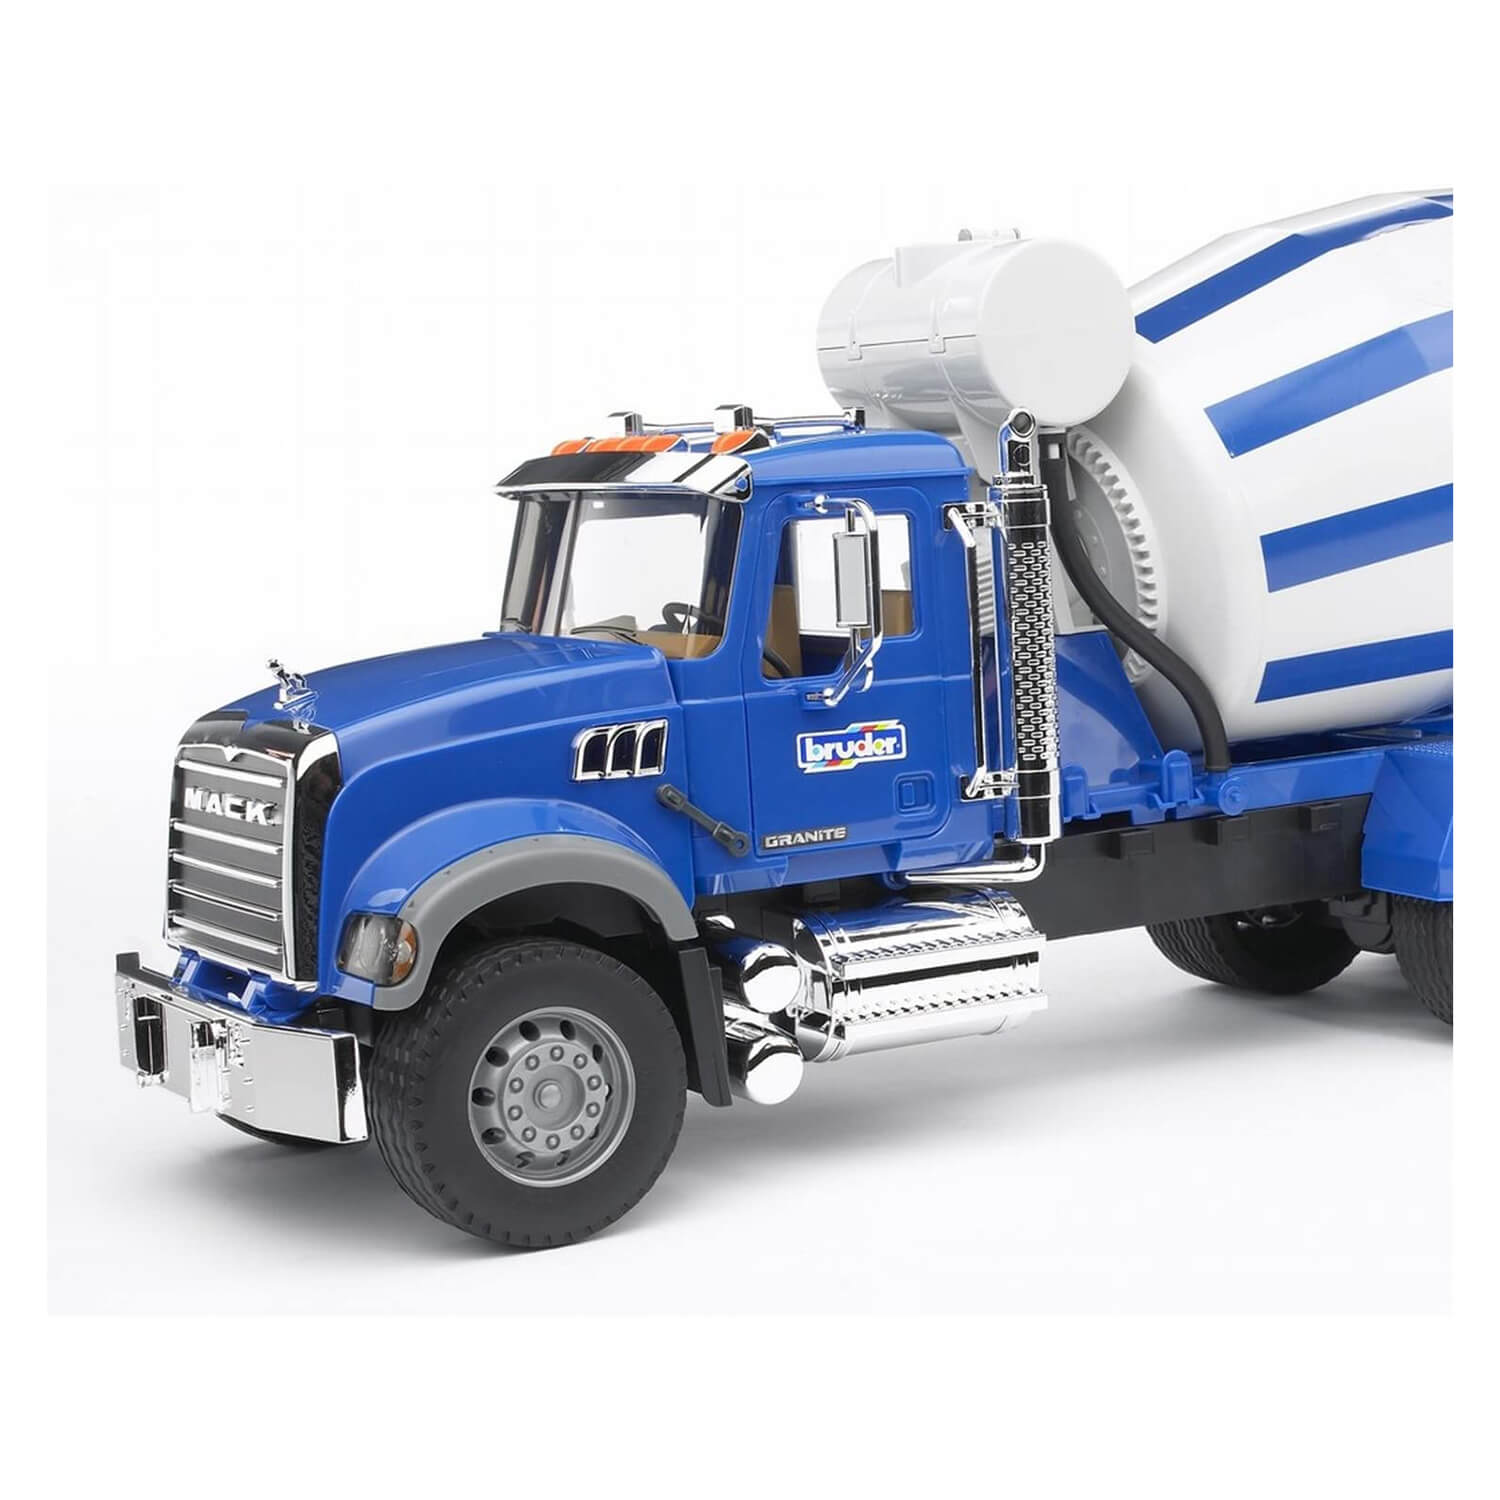 Side closeup view of the Bruder Pro Series Mack Granite Cement Mixer 1:16 Scale Vehicle.